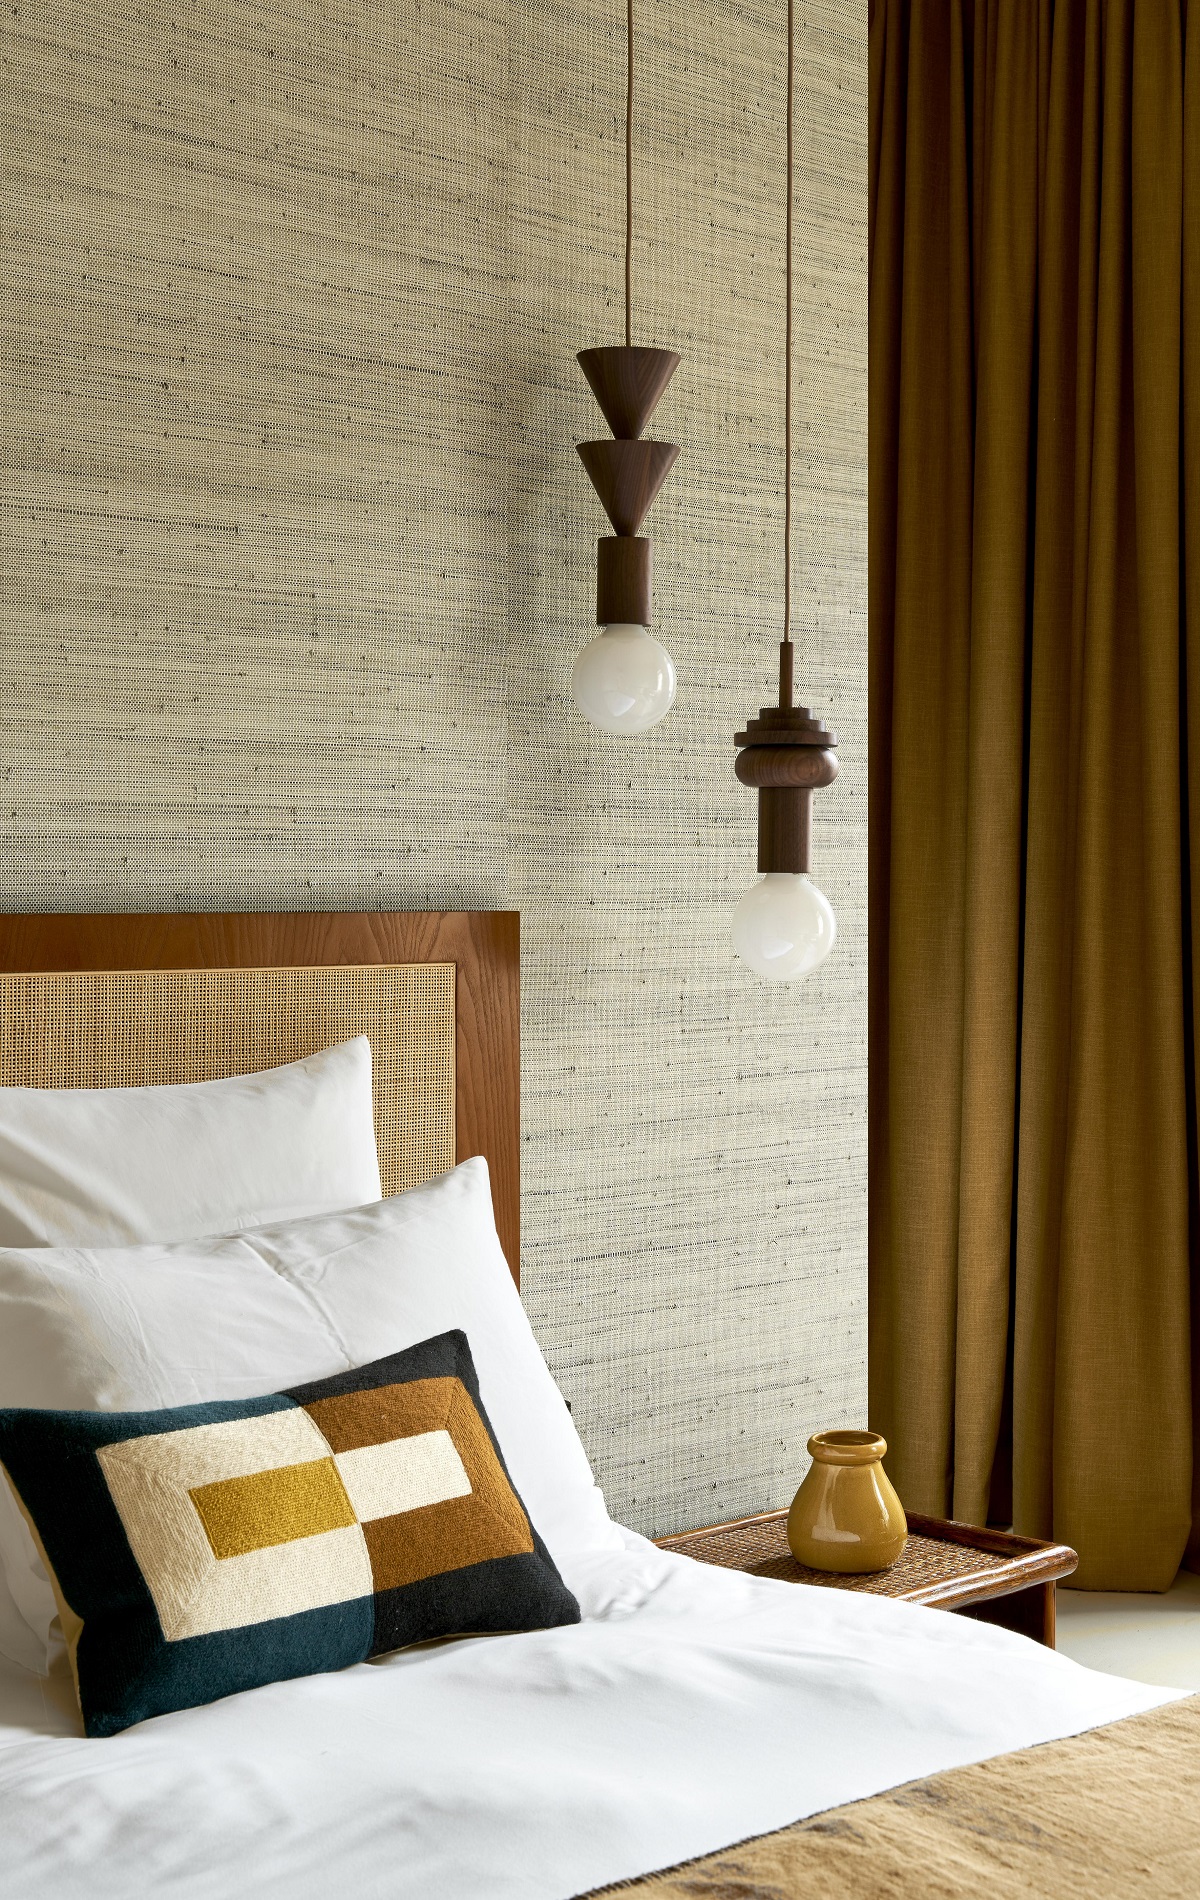 textured natural wallcovering behind bed with graphic patterned cushion and wooden light detail